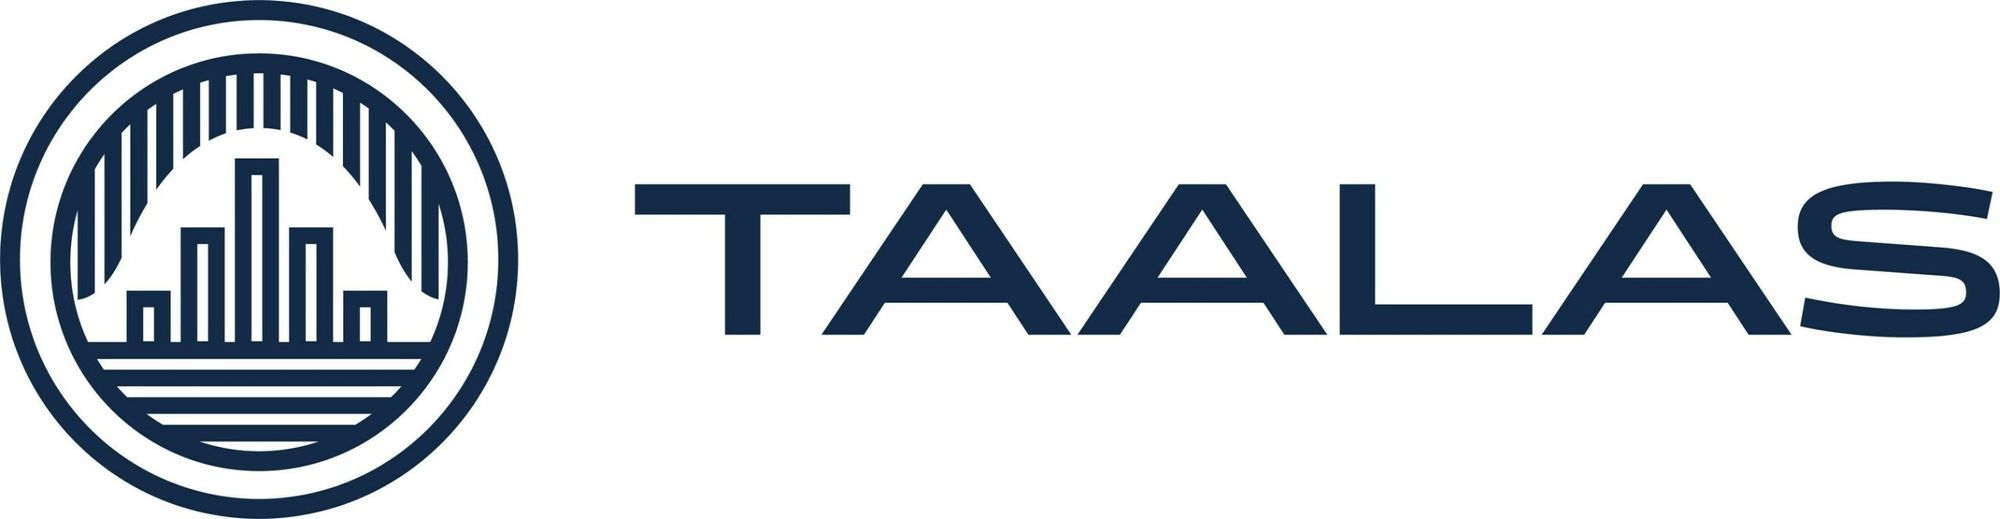 Taalas Secures $50 Million in Investment Round